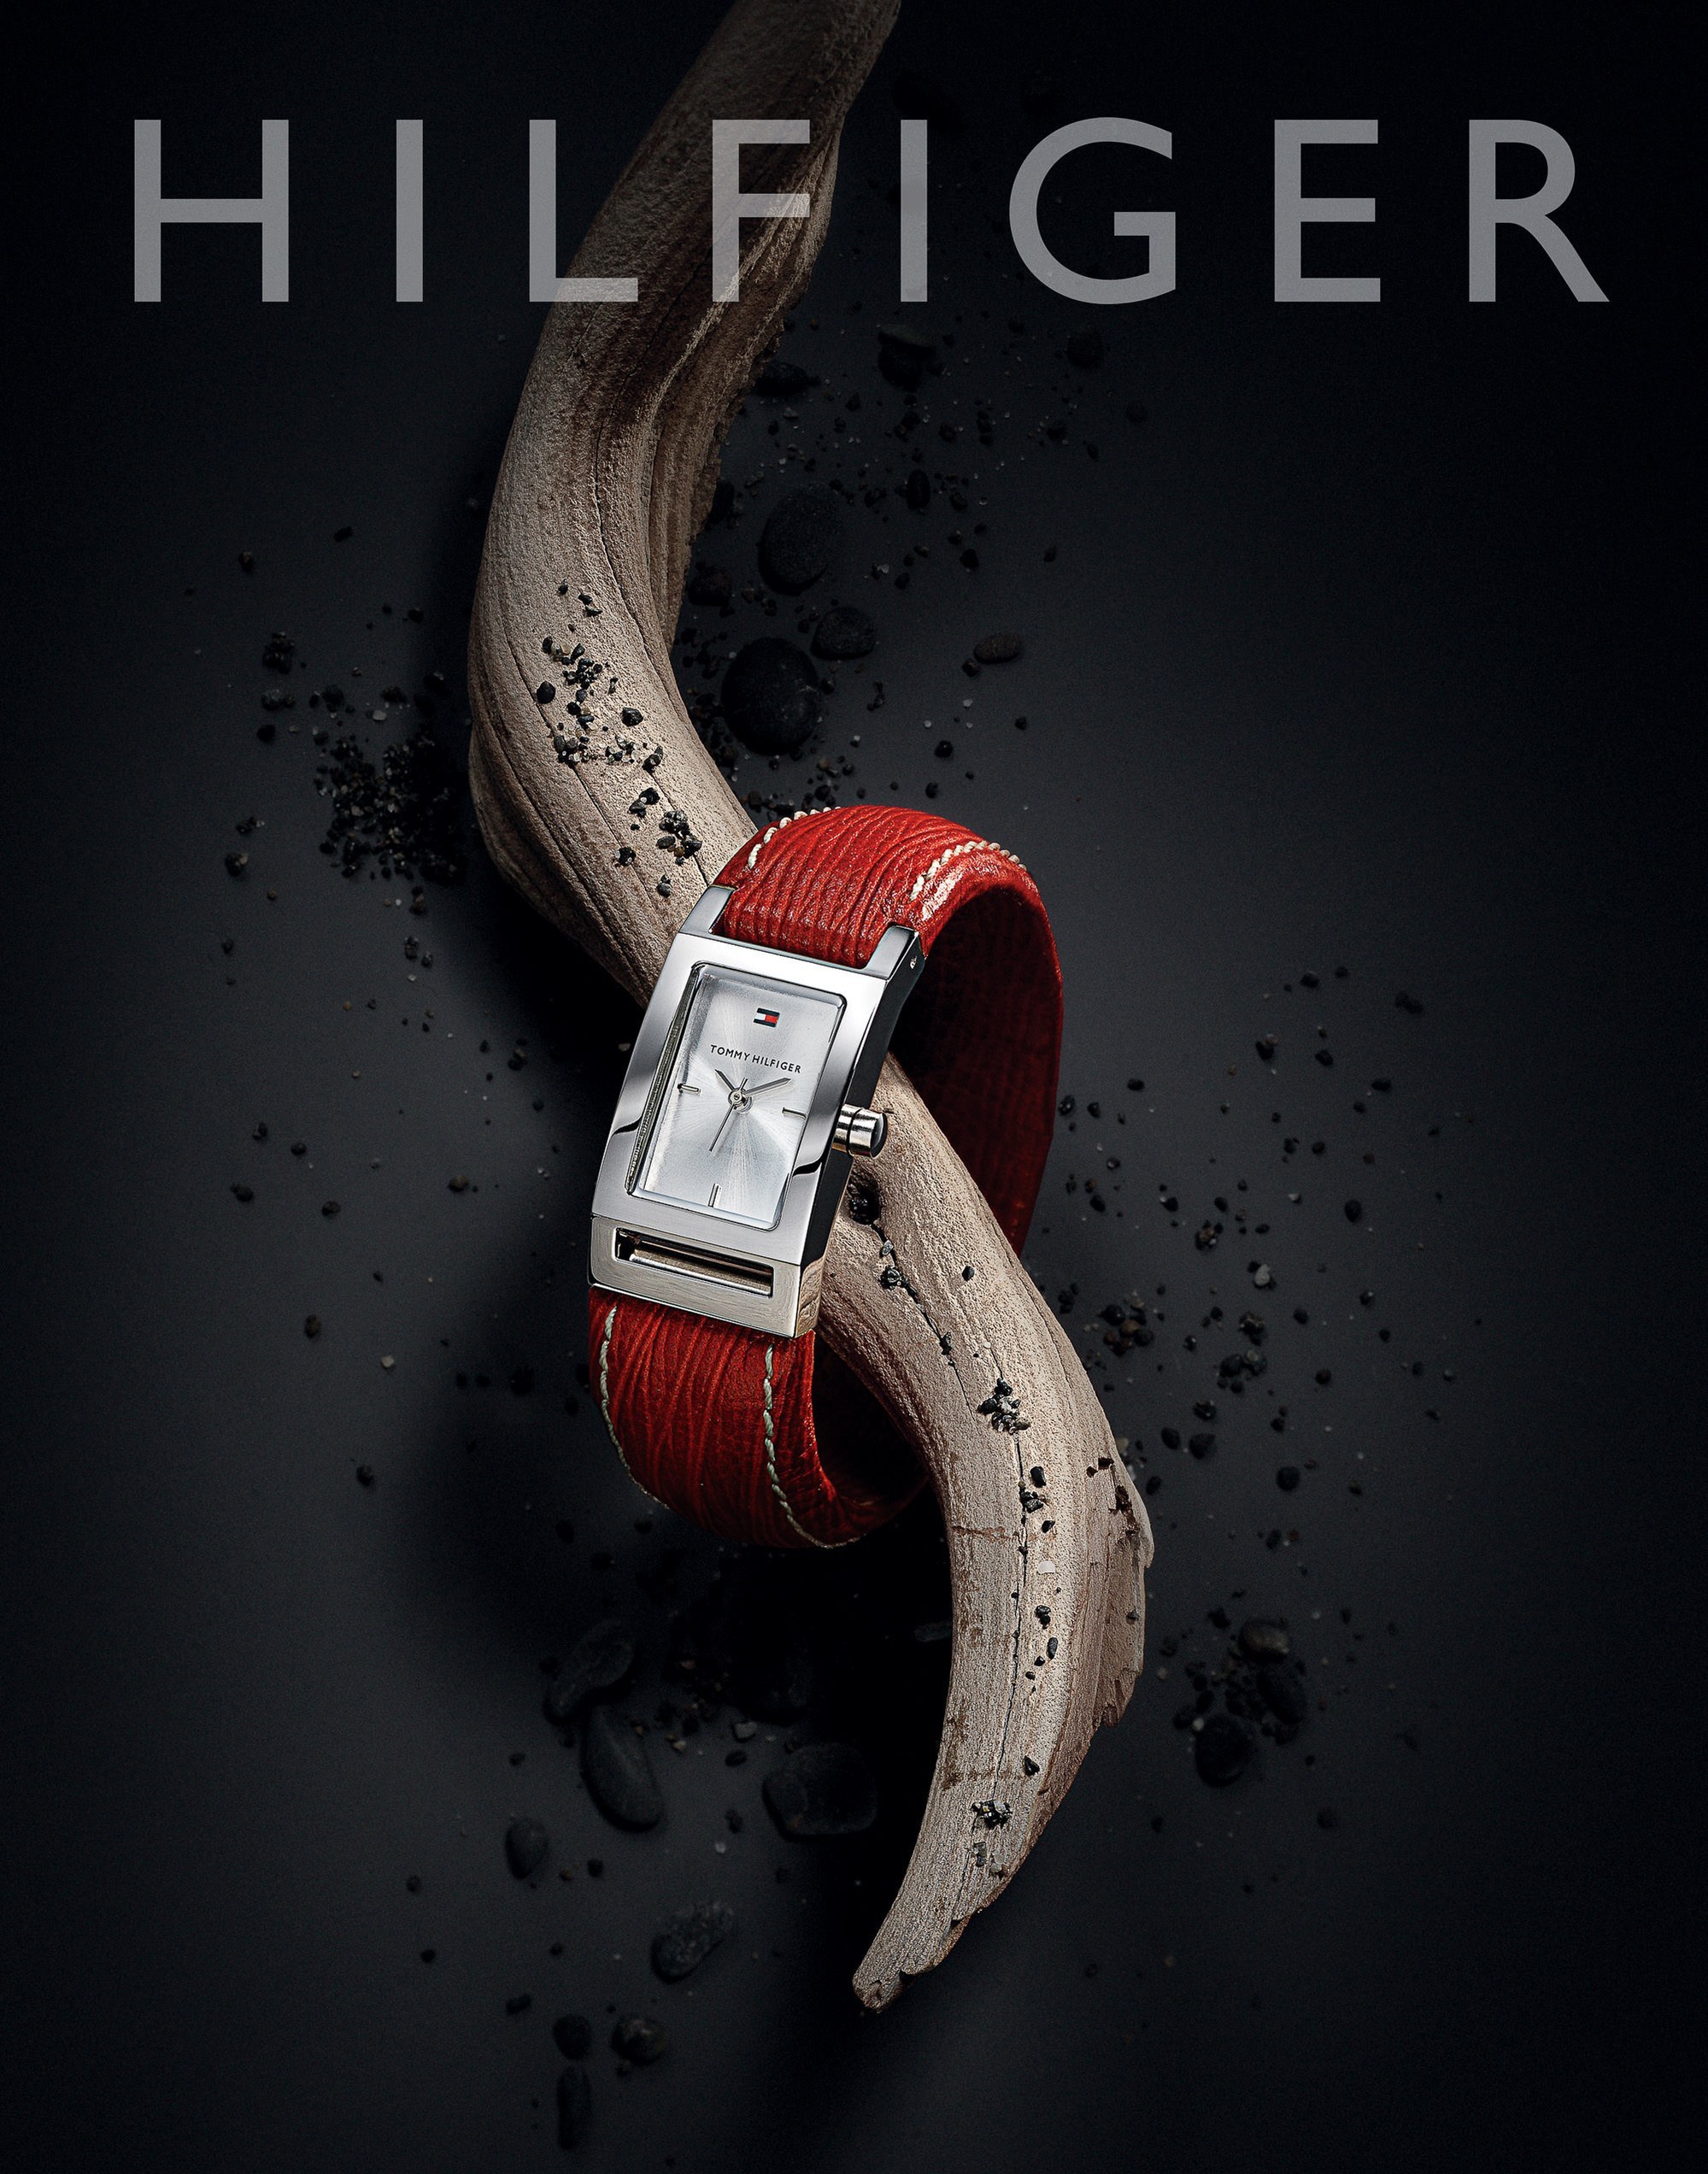 Tommy Hilfiger timepiece and watch campaign photography  by commercial, product & advertising photographer Timothy Hogan in studio Los Angeles